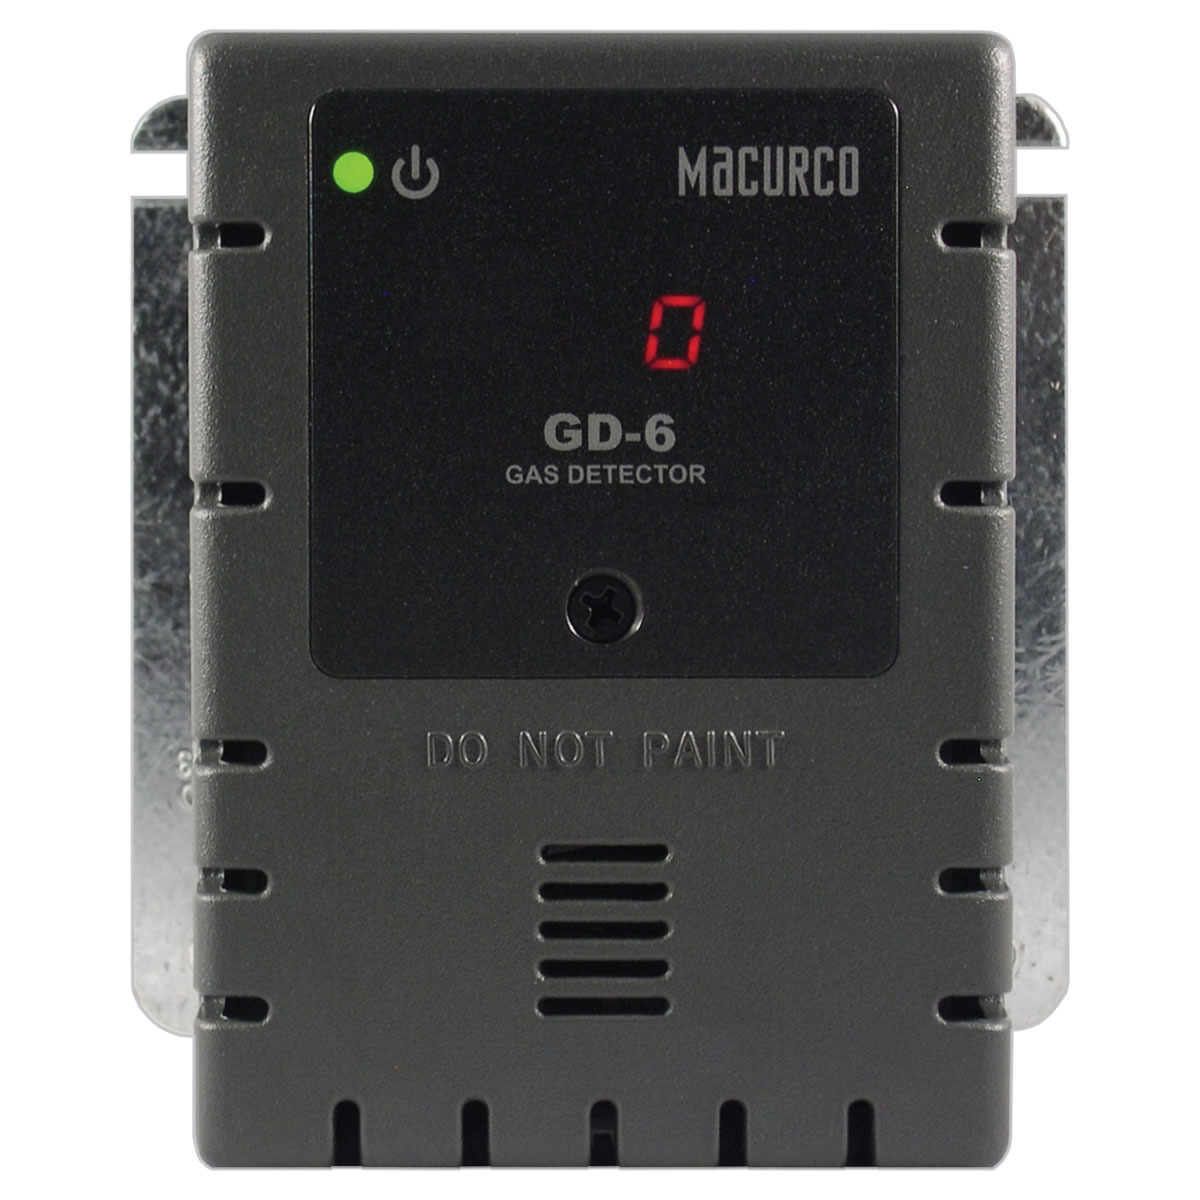 Macurco™ GD-6 Fixed Combustible Gas, Propane, Methane And Hydrogen Detector (Low Voltage Controller Transducer)